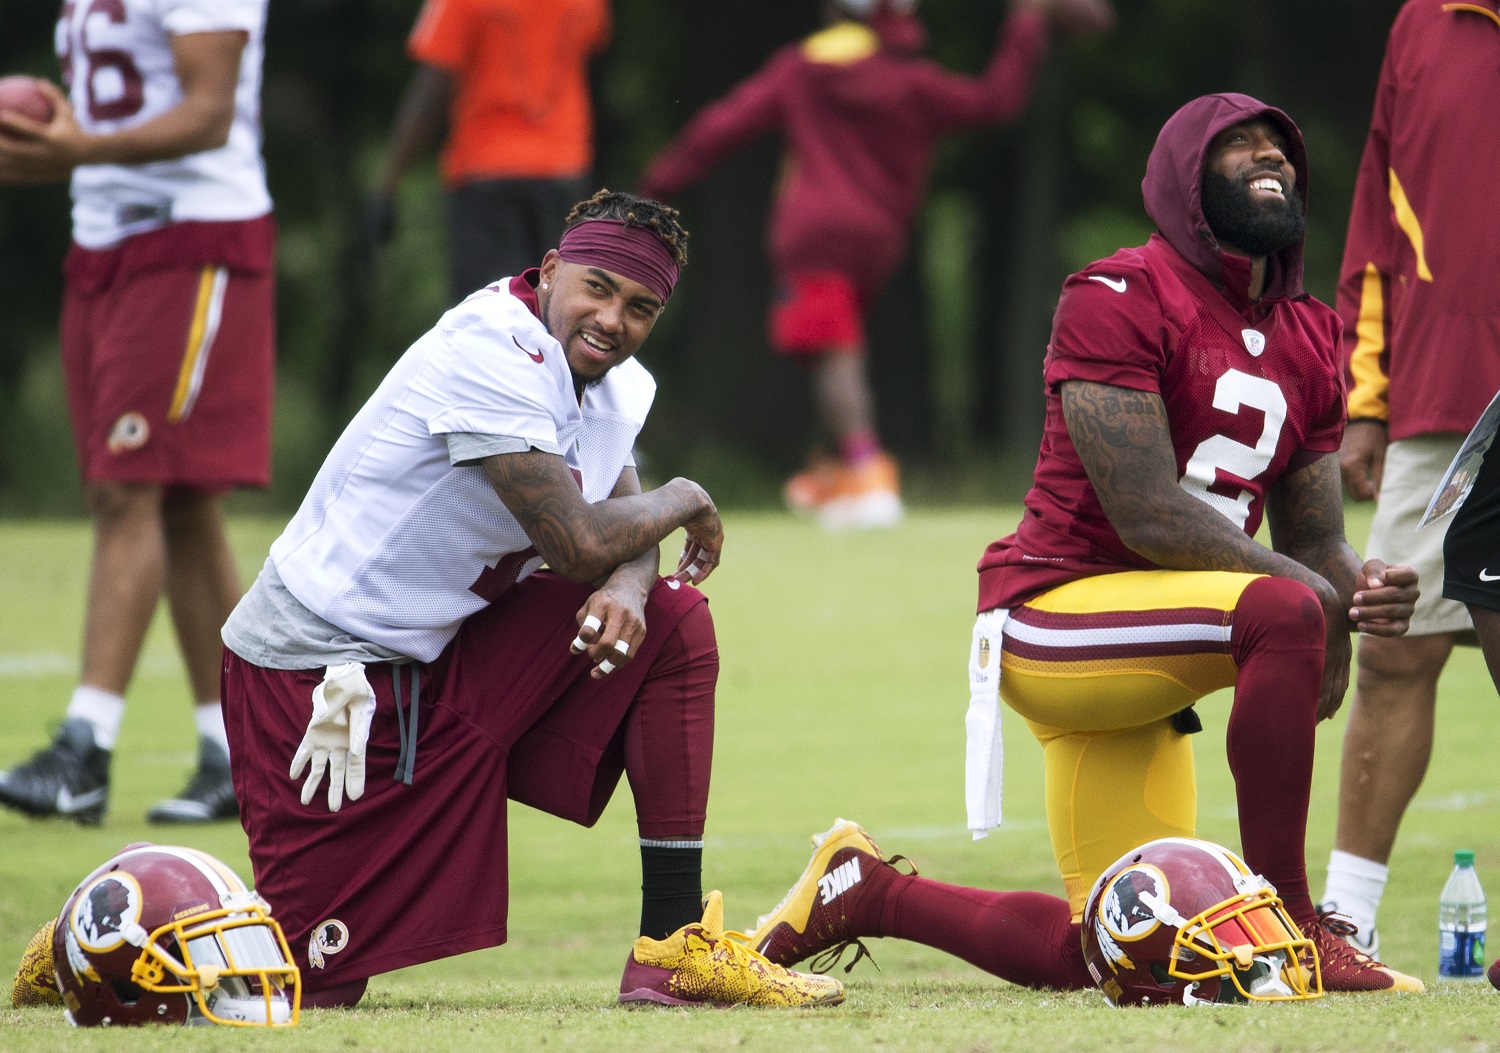 Washington Redskins wide receiver DeSean Jackson, left, and safety DeAngelo Hall, right, stretch during the NFL football team's minicamp at the Redskins Park in Ashburn, Va., Wednesday, June 15, 2016. (AP Photo/Manuel Balce Ceneta)